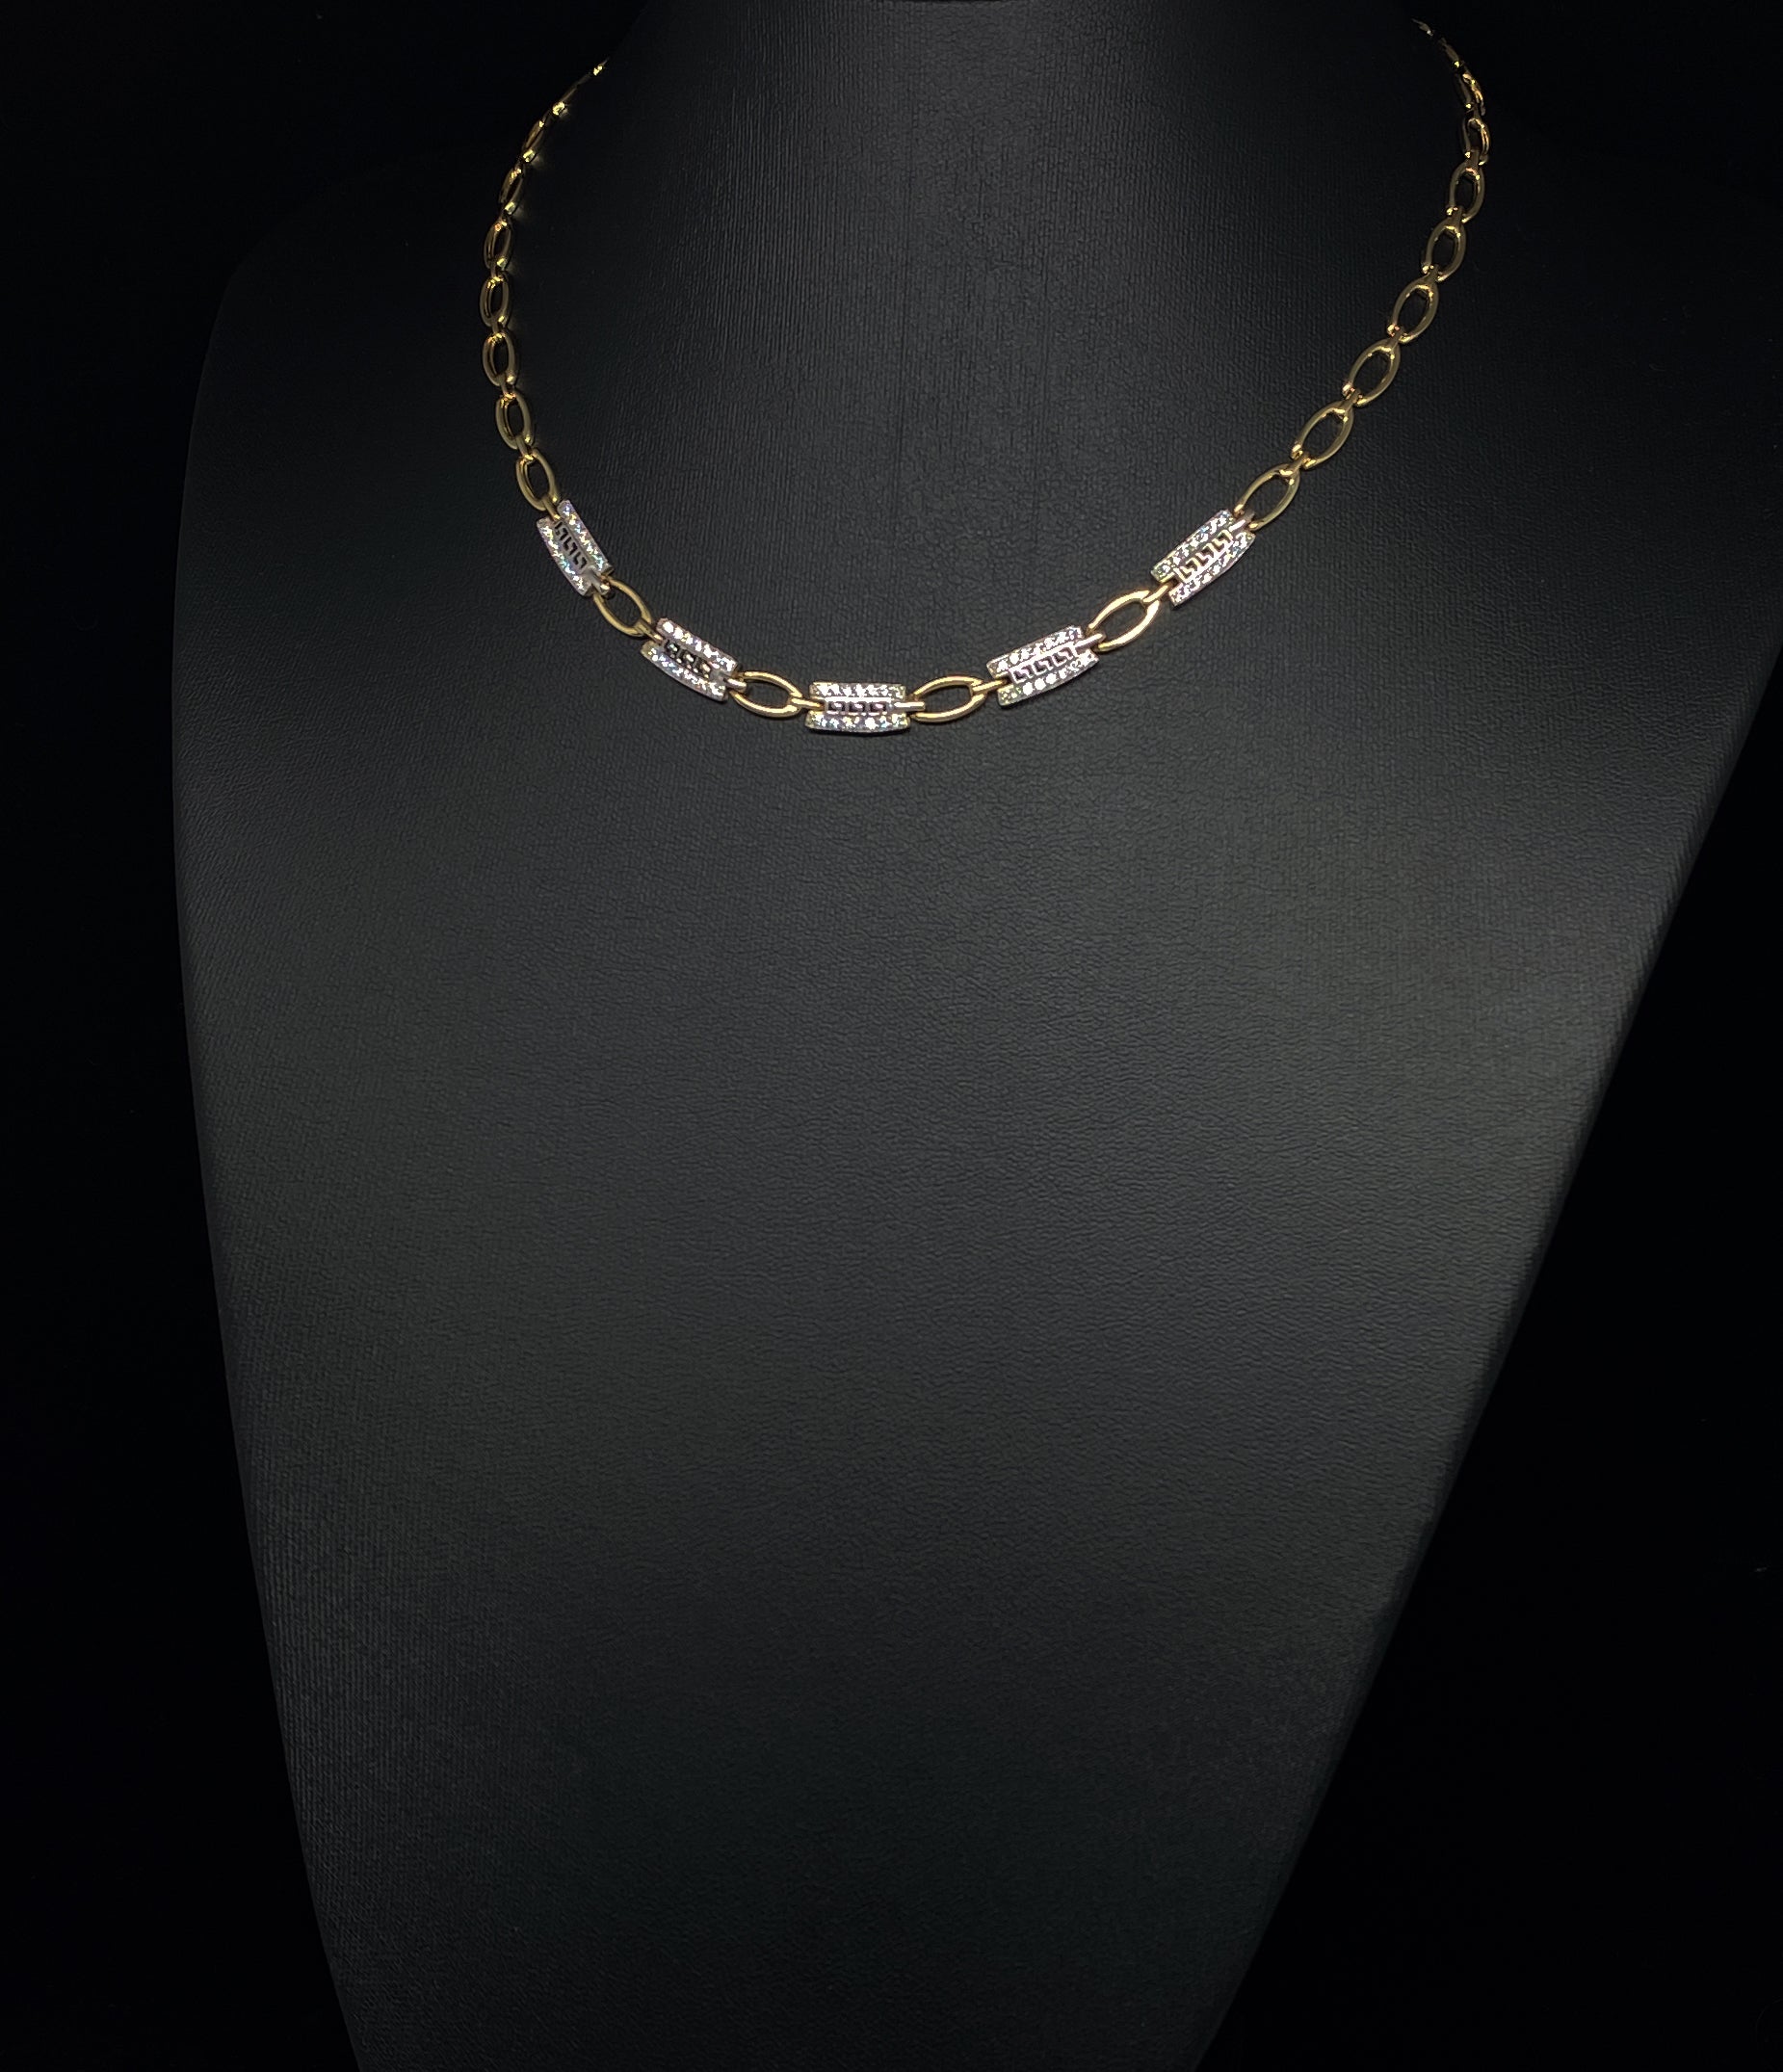 VERSACE STYLE CUBIC ZIRCONIA YELLOW GOLD NECKLACE